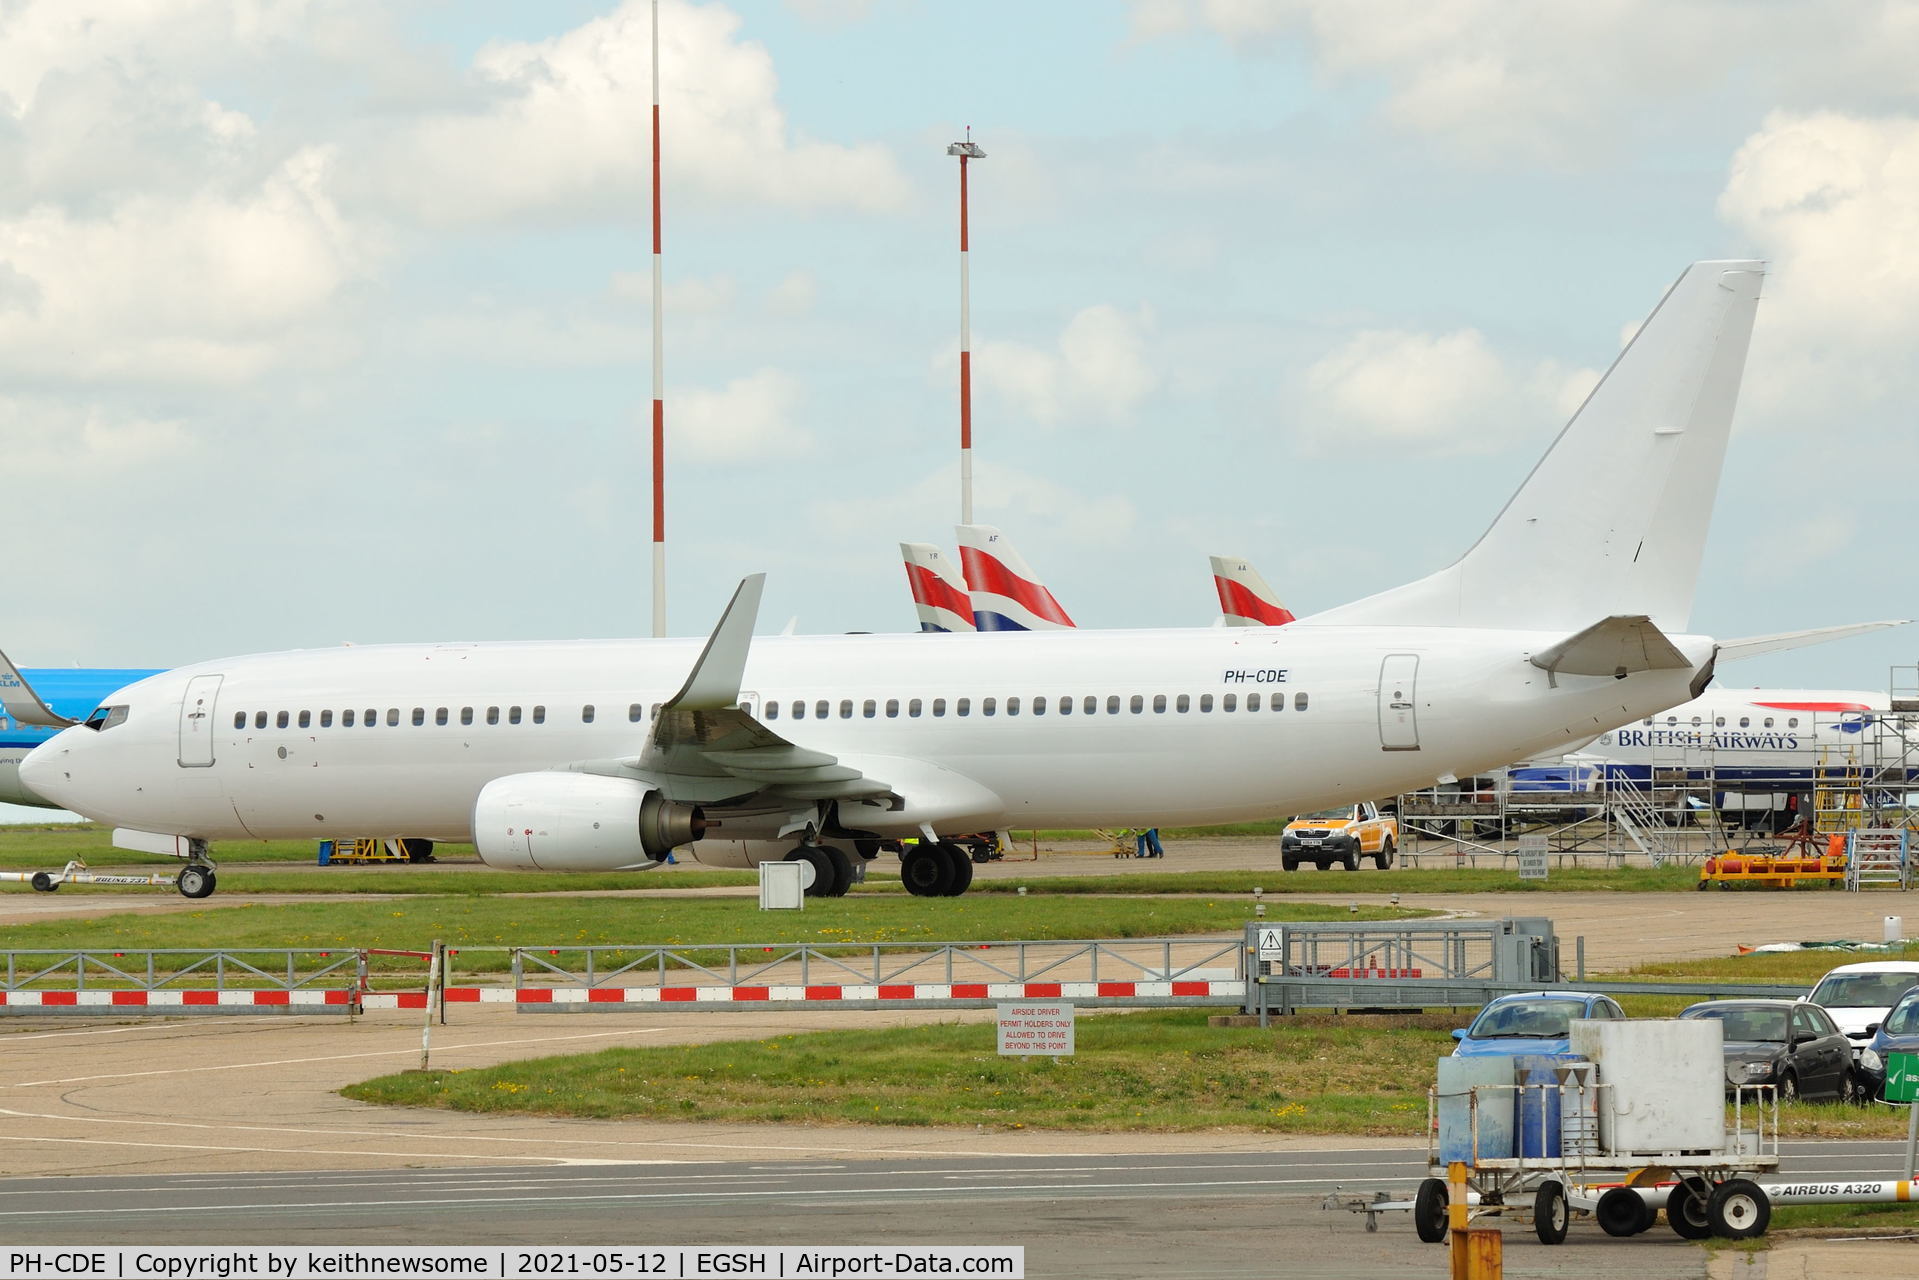 PH-CDE, 2008 Boeing 737-86Q C/N 35795, Removed from spray shop with all over white colour scheme.